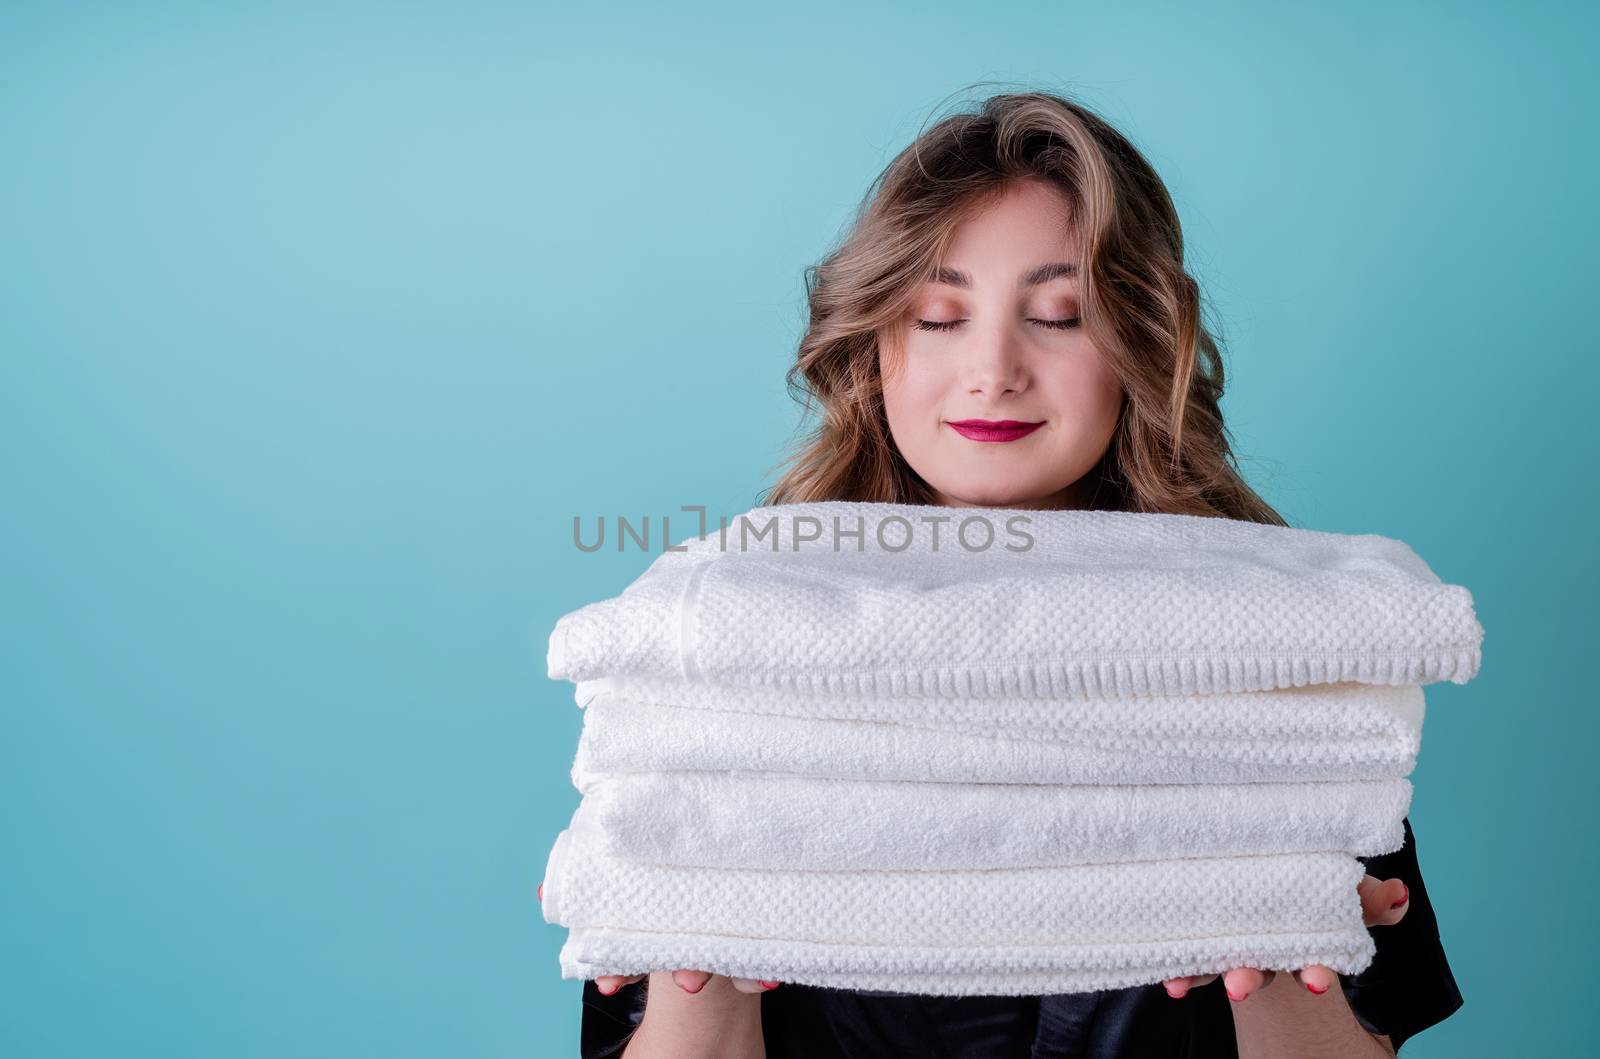 Laundry concept. Happy housewife holding a pile of clean white towels isolated on blue background with copy space